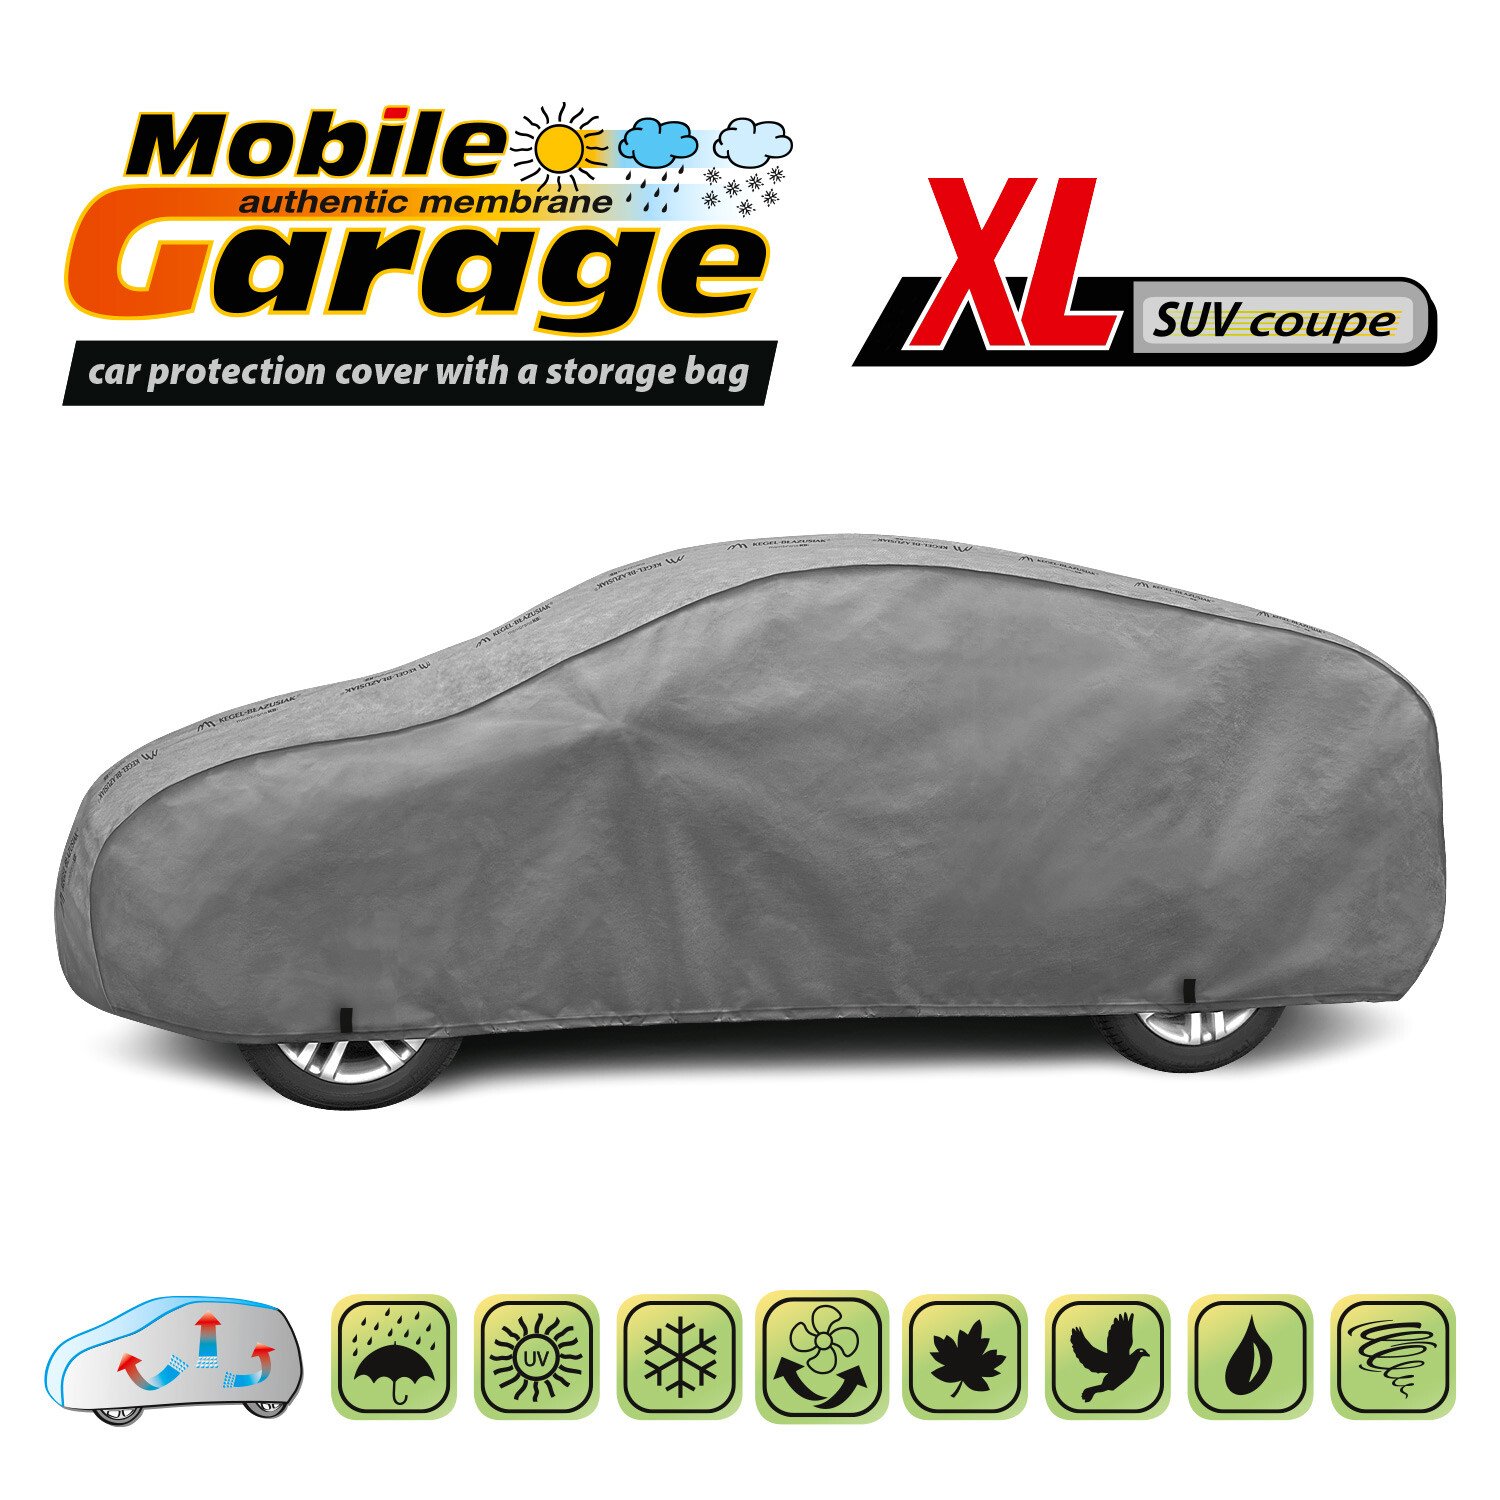 Mobile Garage full car cover size - XL SUV - Coupe thumb